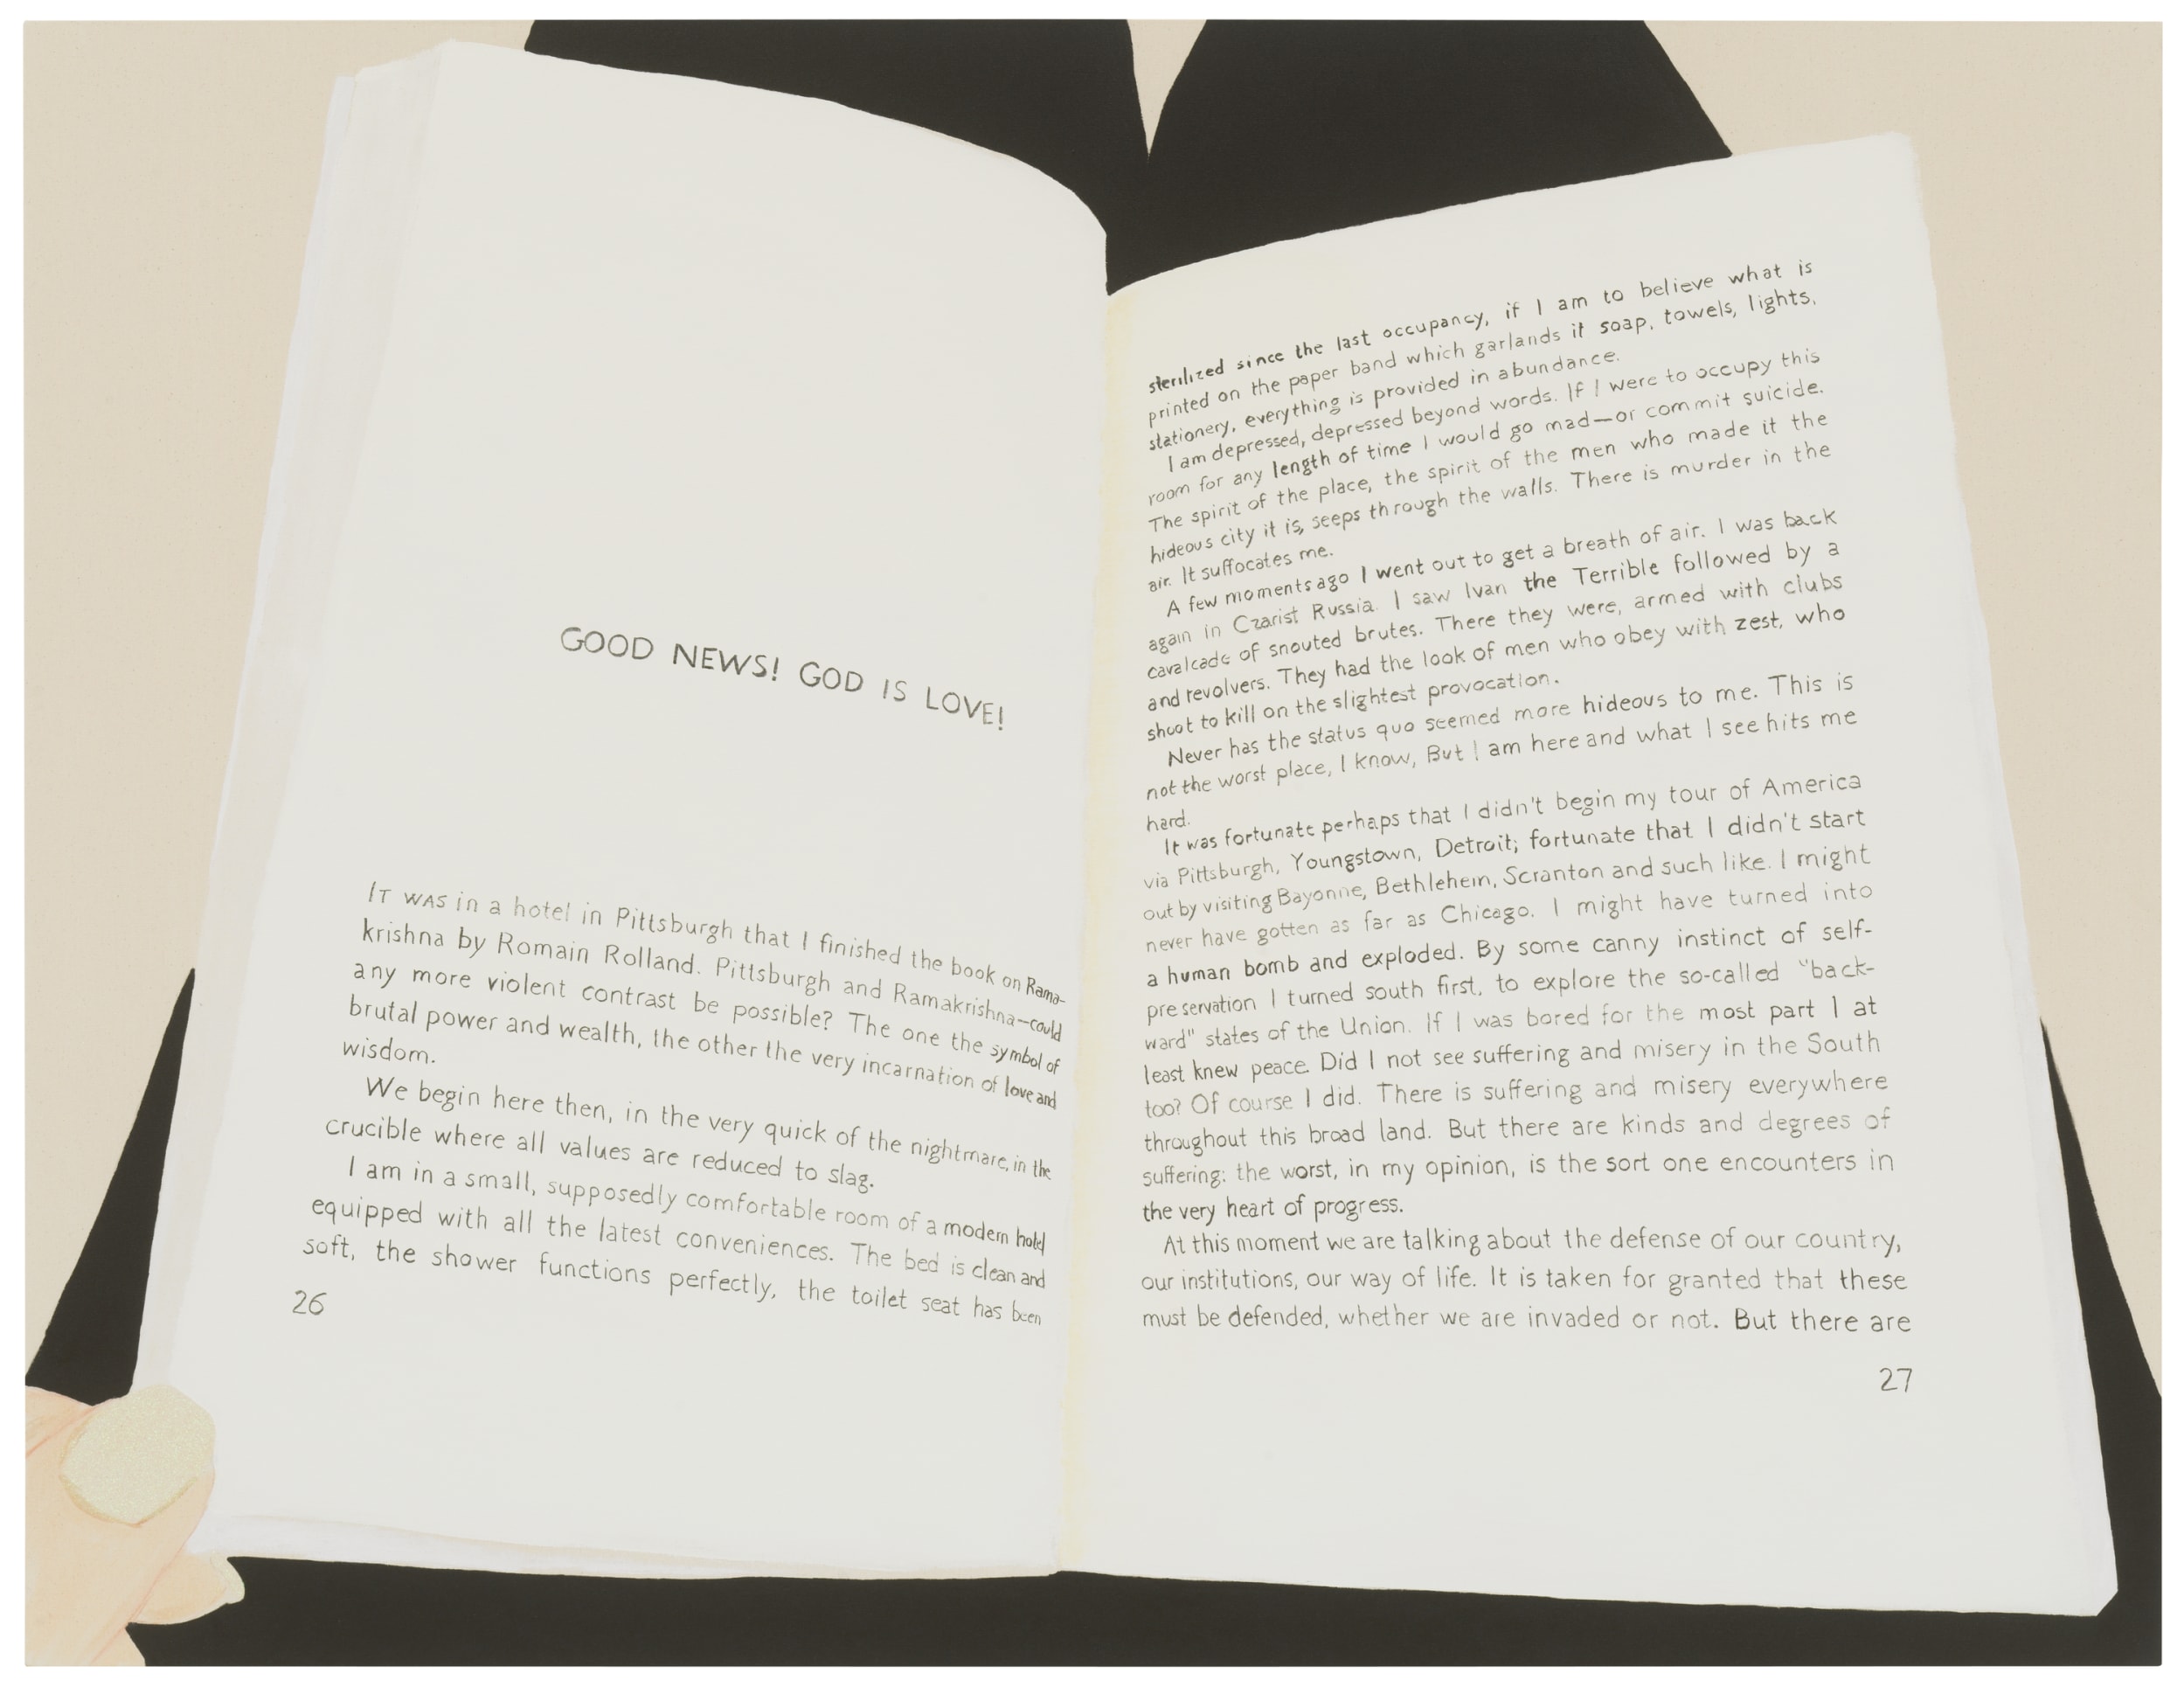 “Reading Henry Miller’s Air-Conditioned Nightmare from the mid-1940’s”